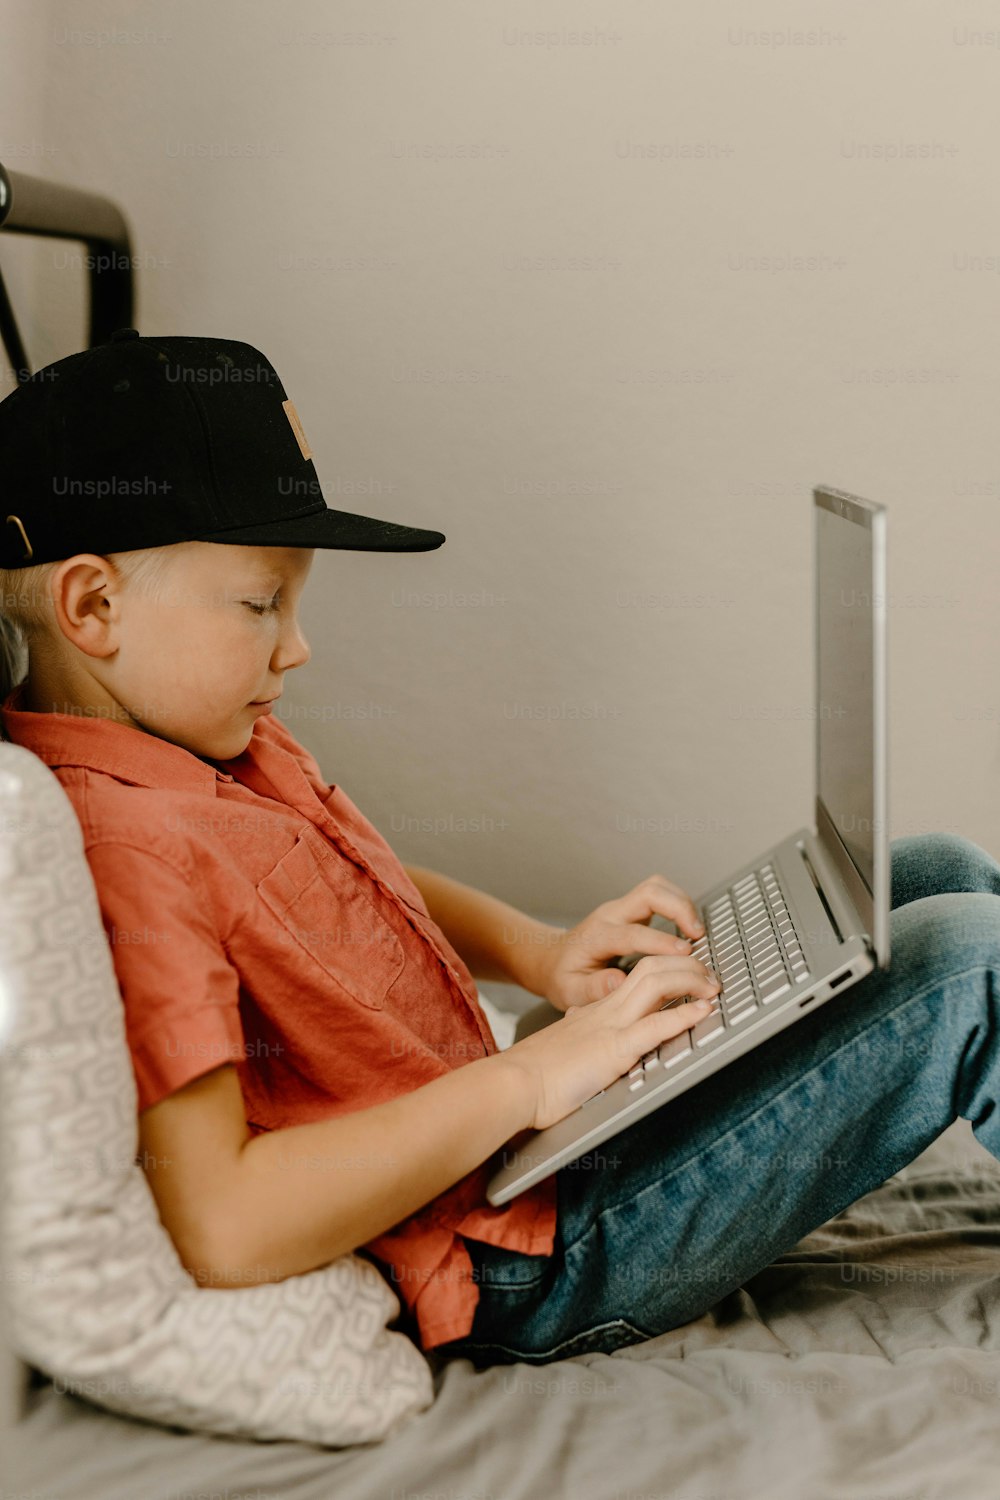 a young boy sitting on a bed using a laptop computer